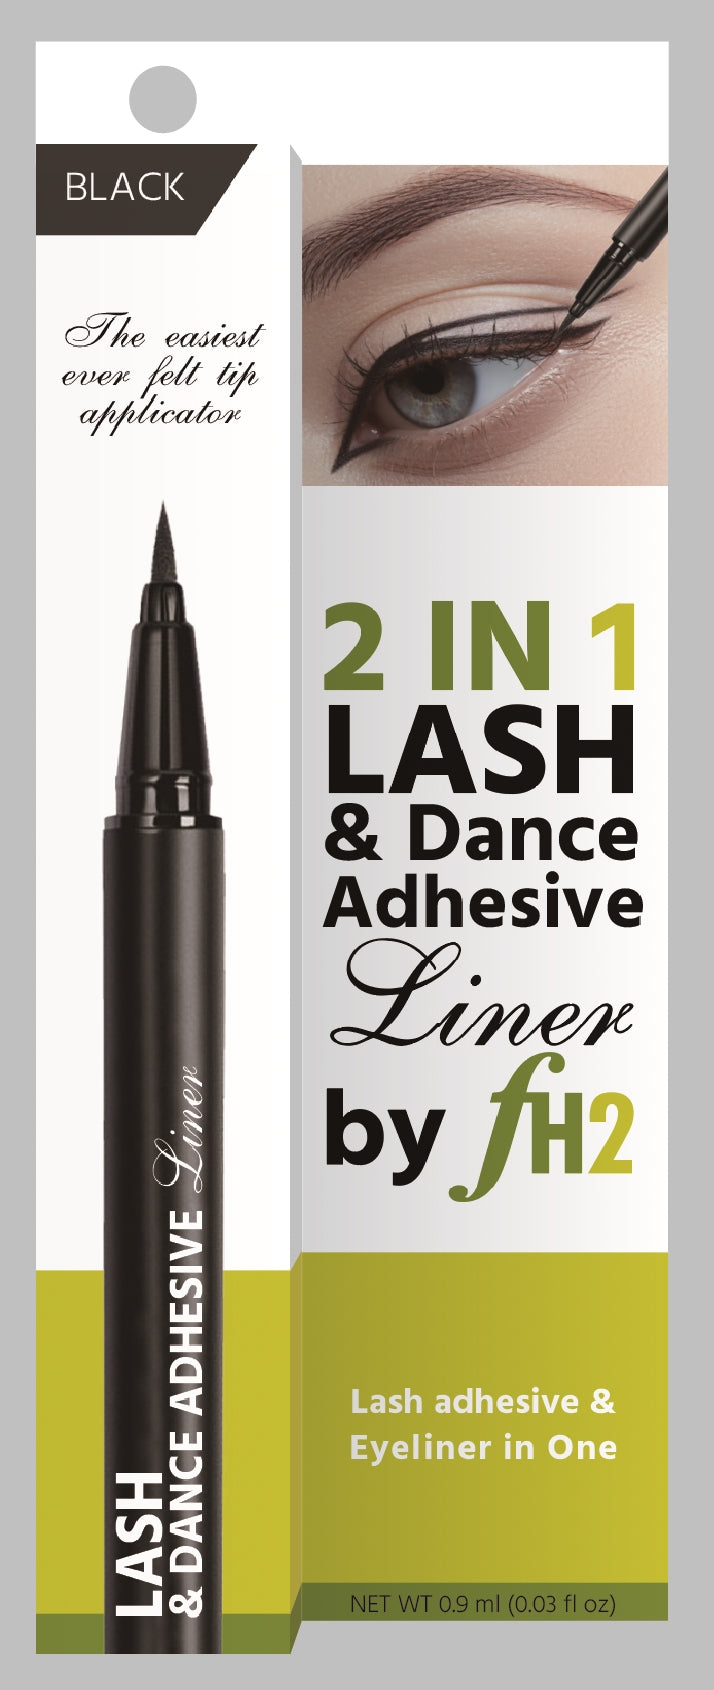 2 IN 1 Lash & Dance Adhesive Liner by FH2